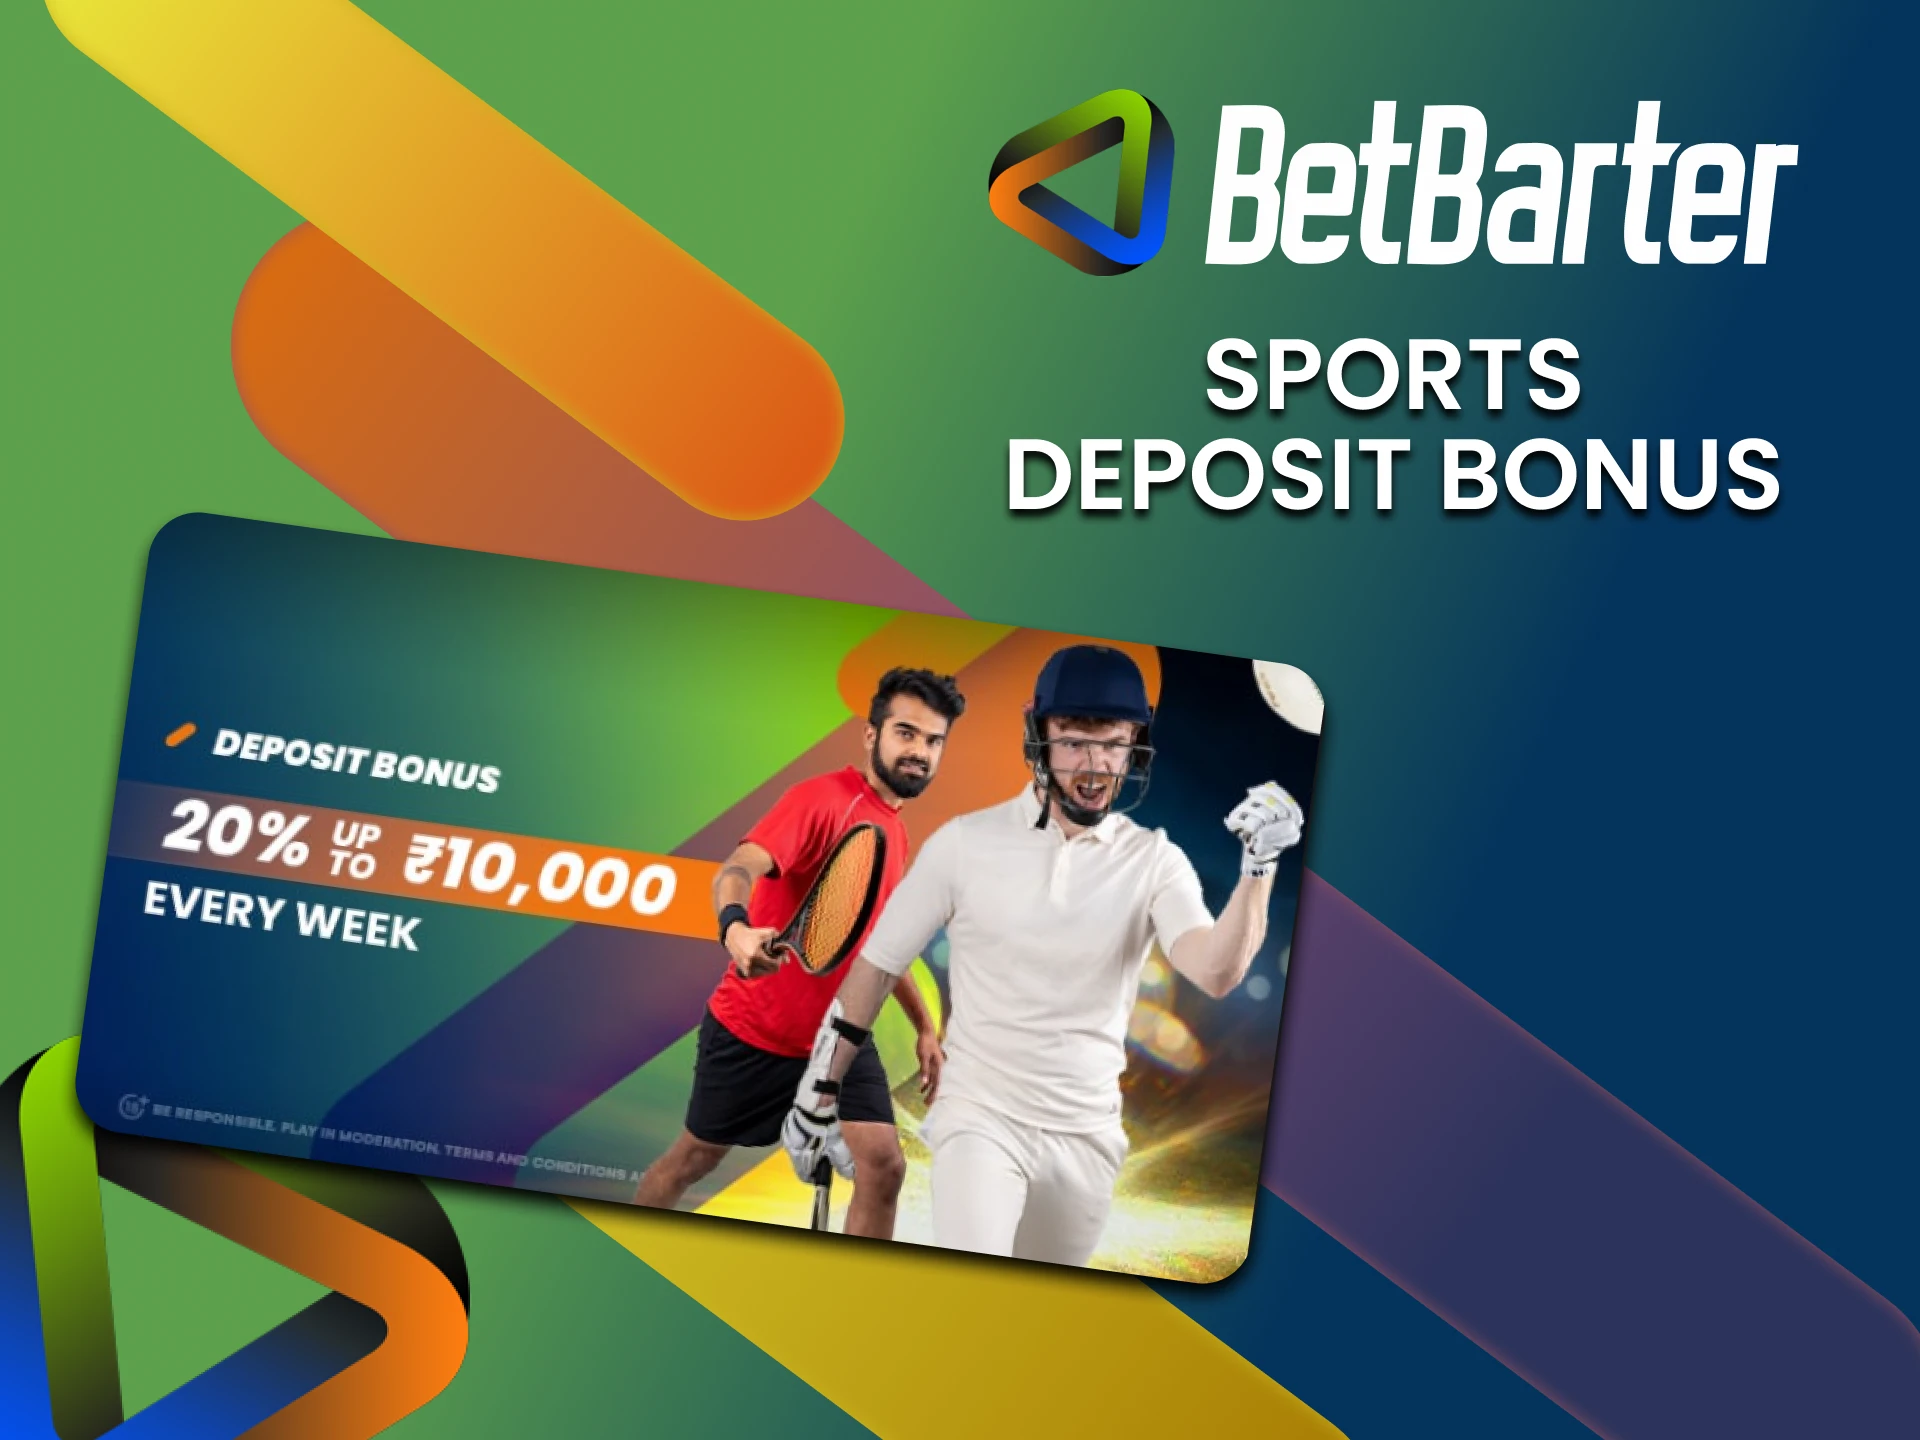 By making a deposit on BetBarter you will receive a cricket bonus.